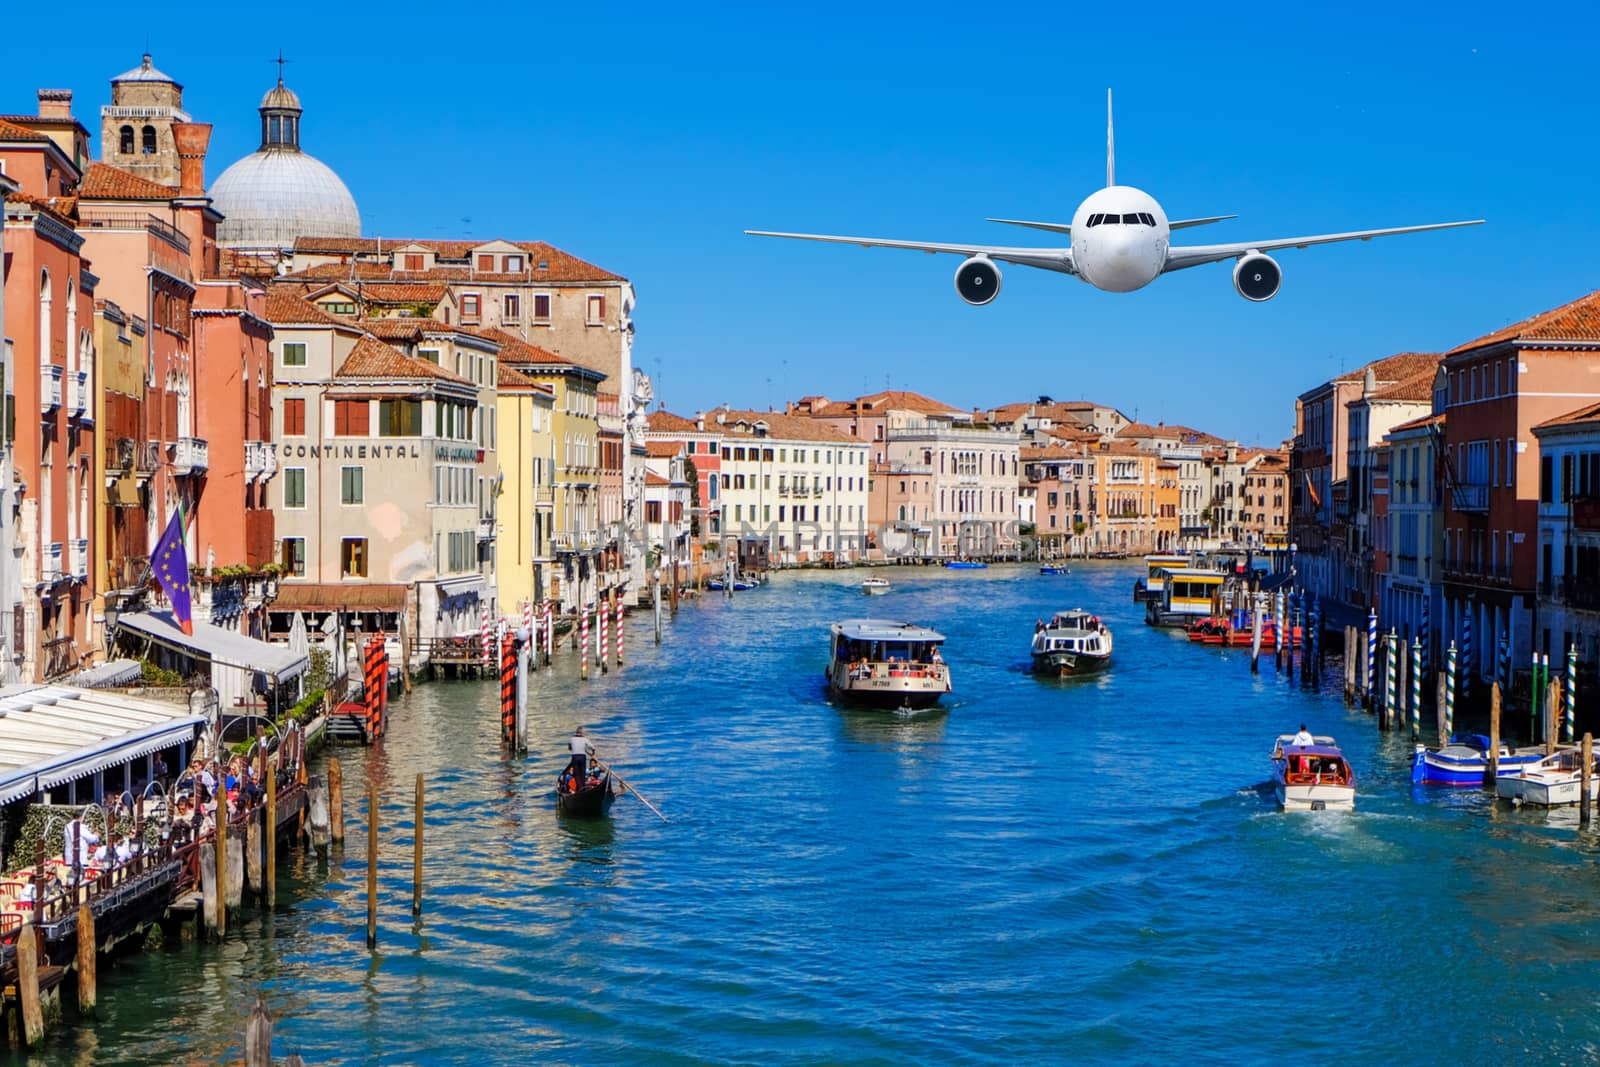 Front of real plane aircraft, on Venice grand canal in Sunrise at Venice, Italy background